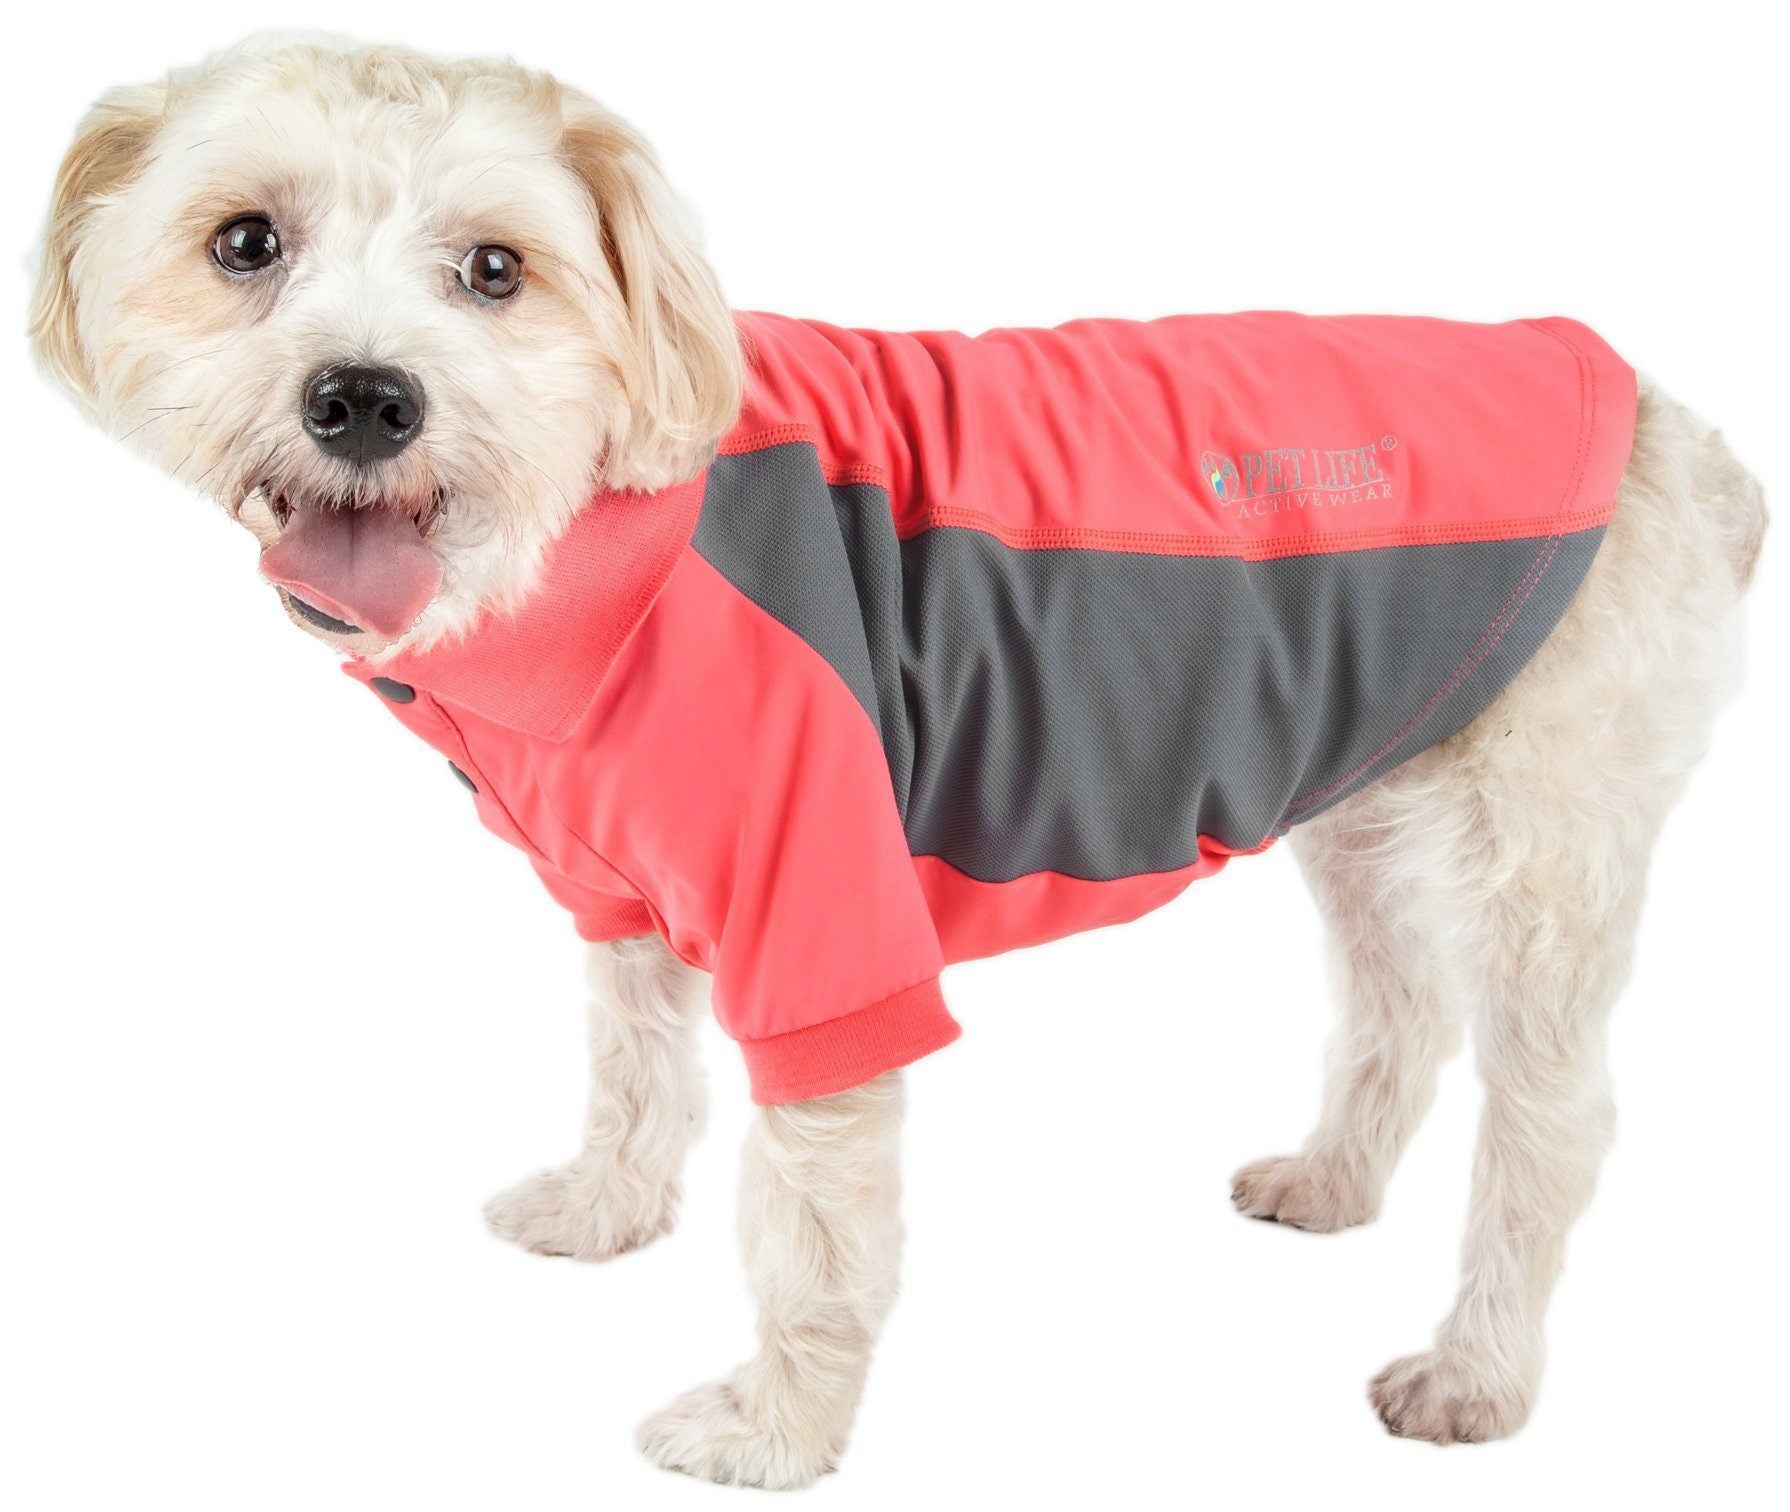 Pet Life ® Active 'Barko Pawlo' Relax-Stretch Quick-Drying Performance Dog Polo T-Shirt X-Small Salmon Red And Dark Gray